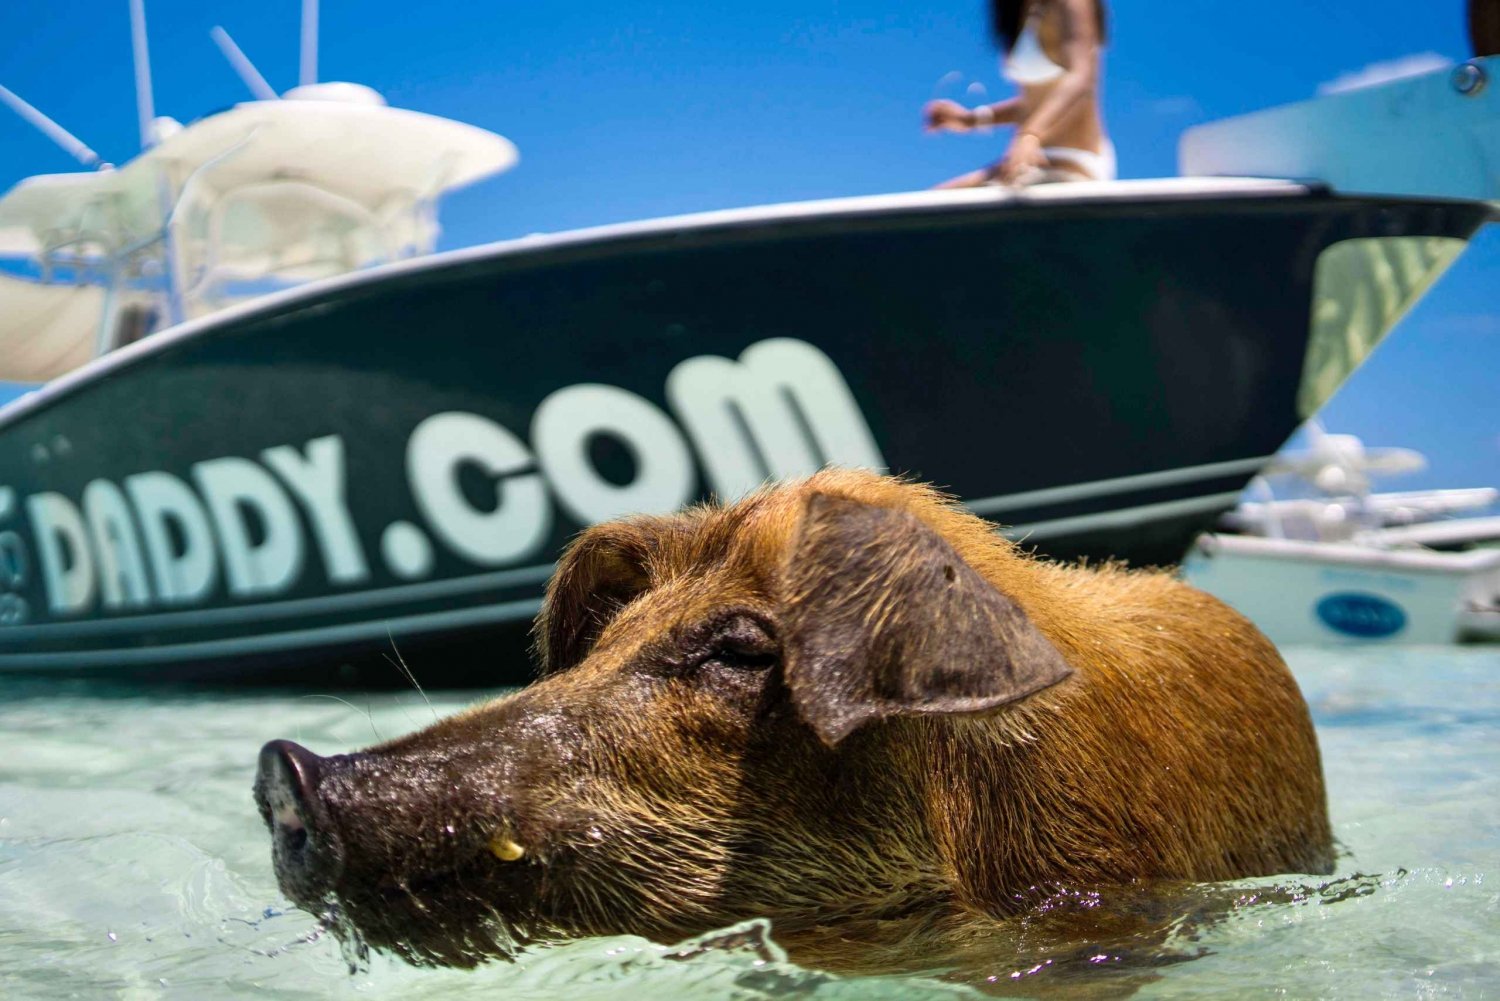 SWIMMING PIGS & SNORKELING 1.5 HOUR BOAT TOUR FROM NASSAU